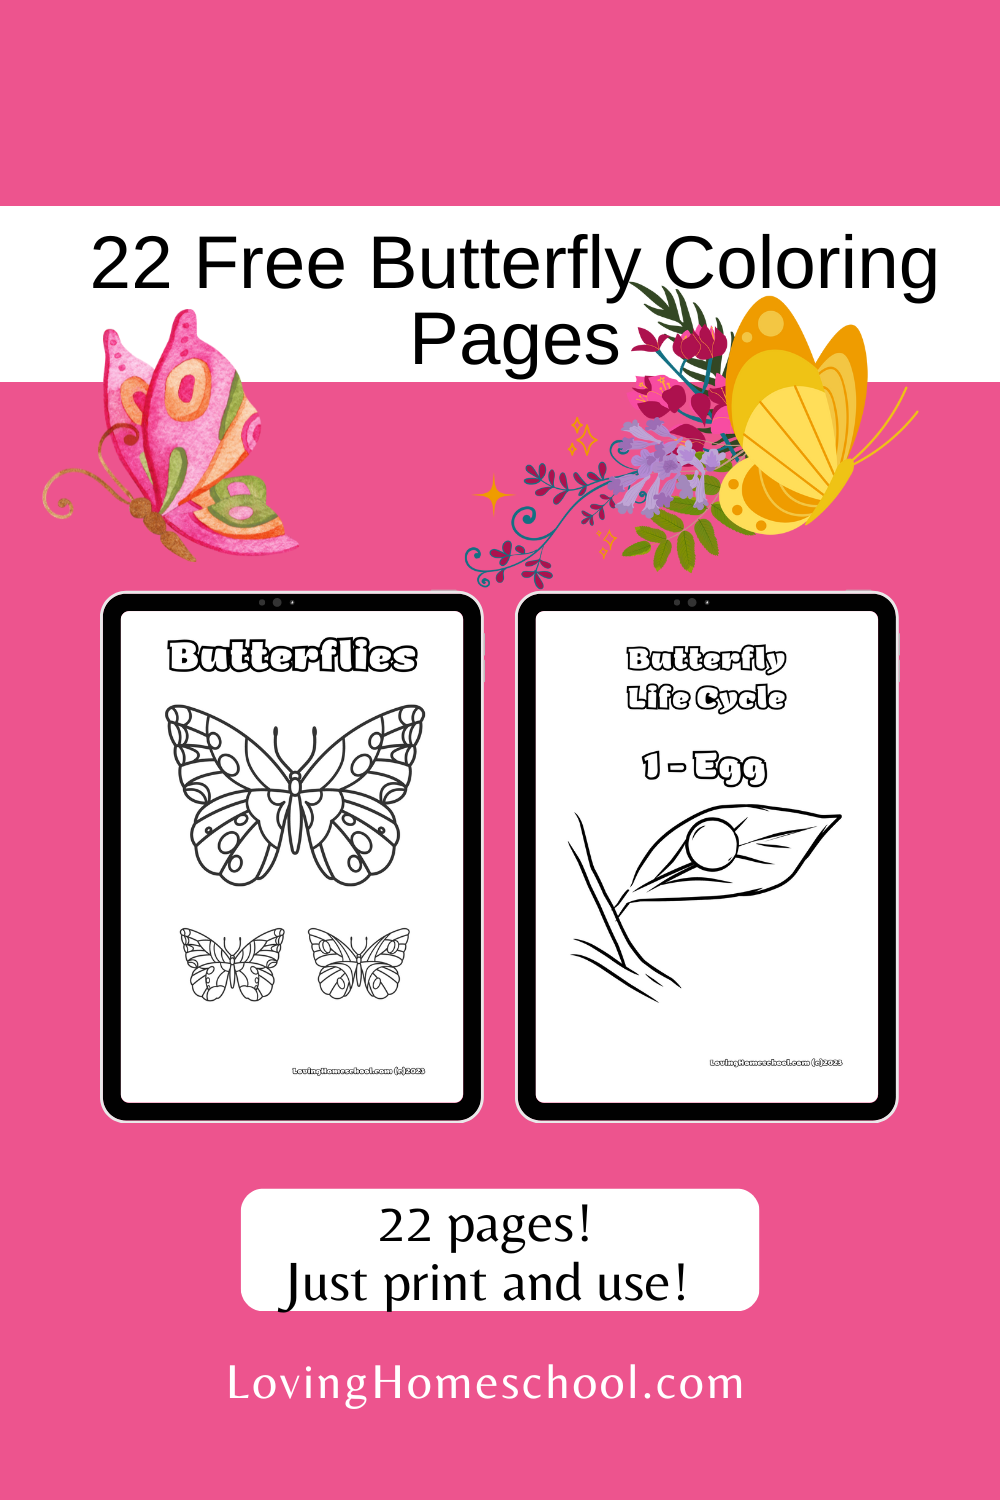 22 Free Butterfly Coloring Pages Pinterest Pin